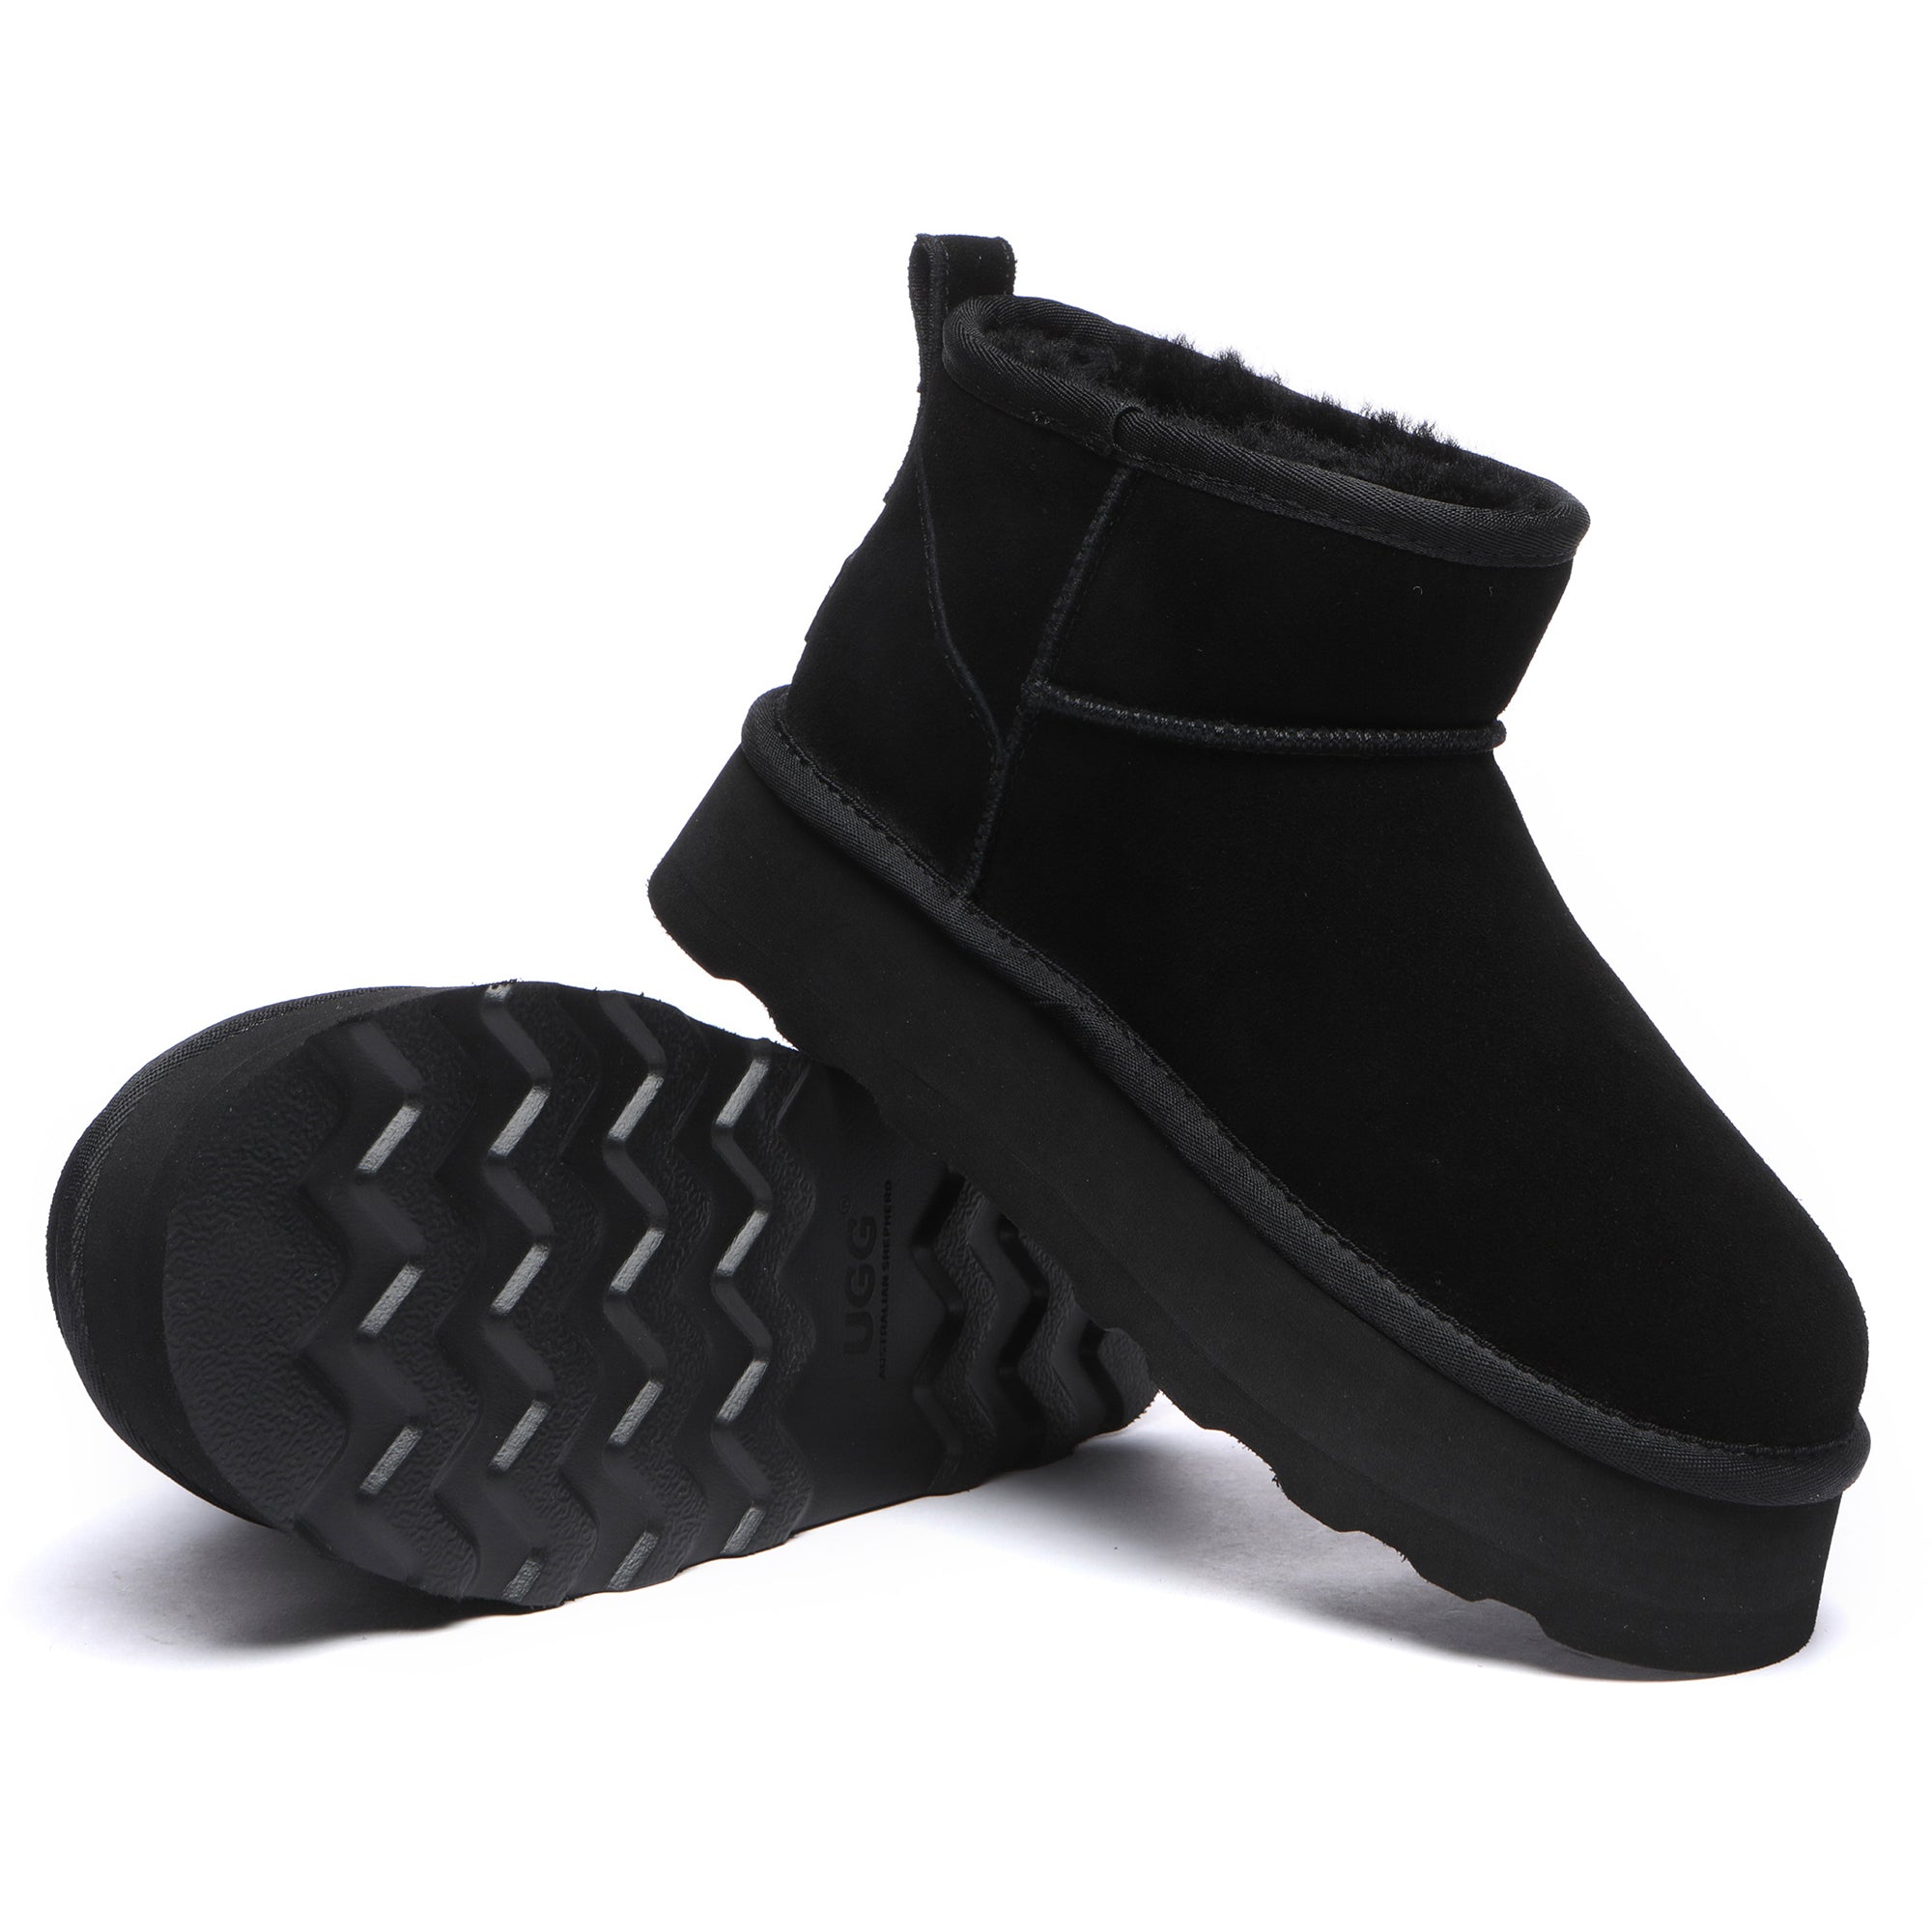 UGG Boots, Shoes and Sandals Online, Top UGG Store